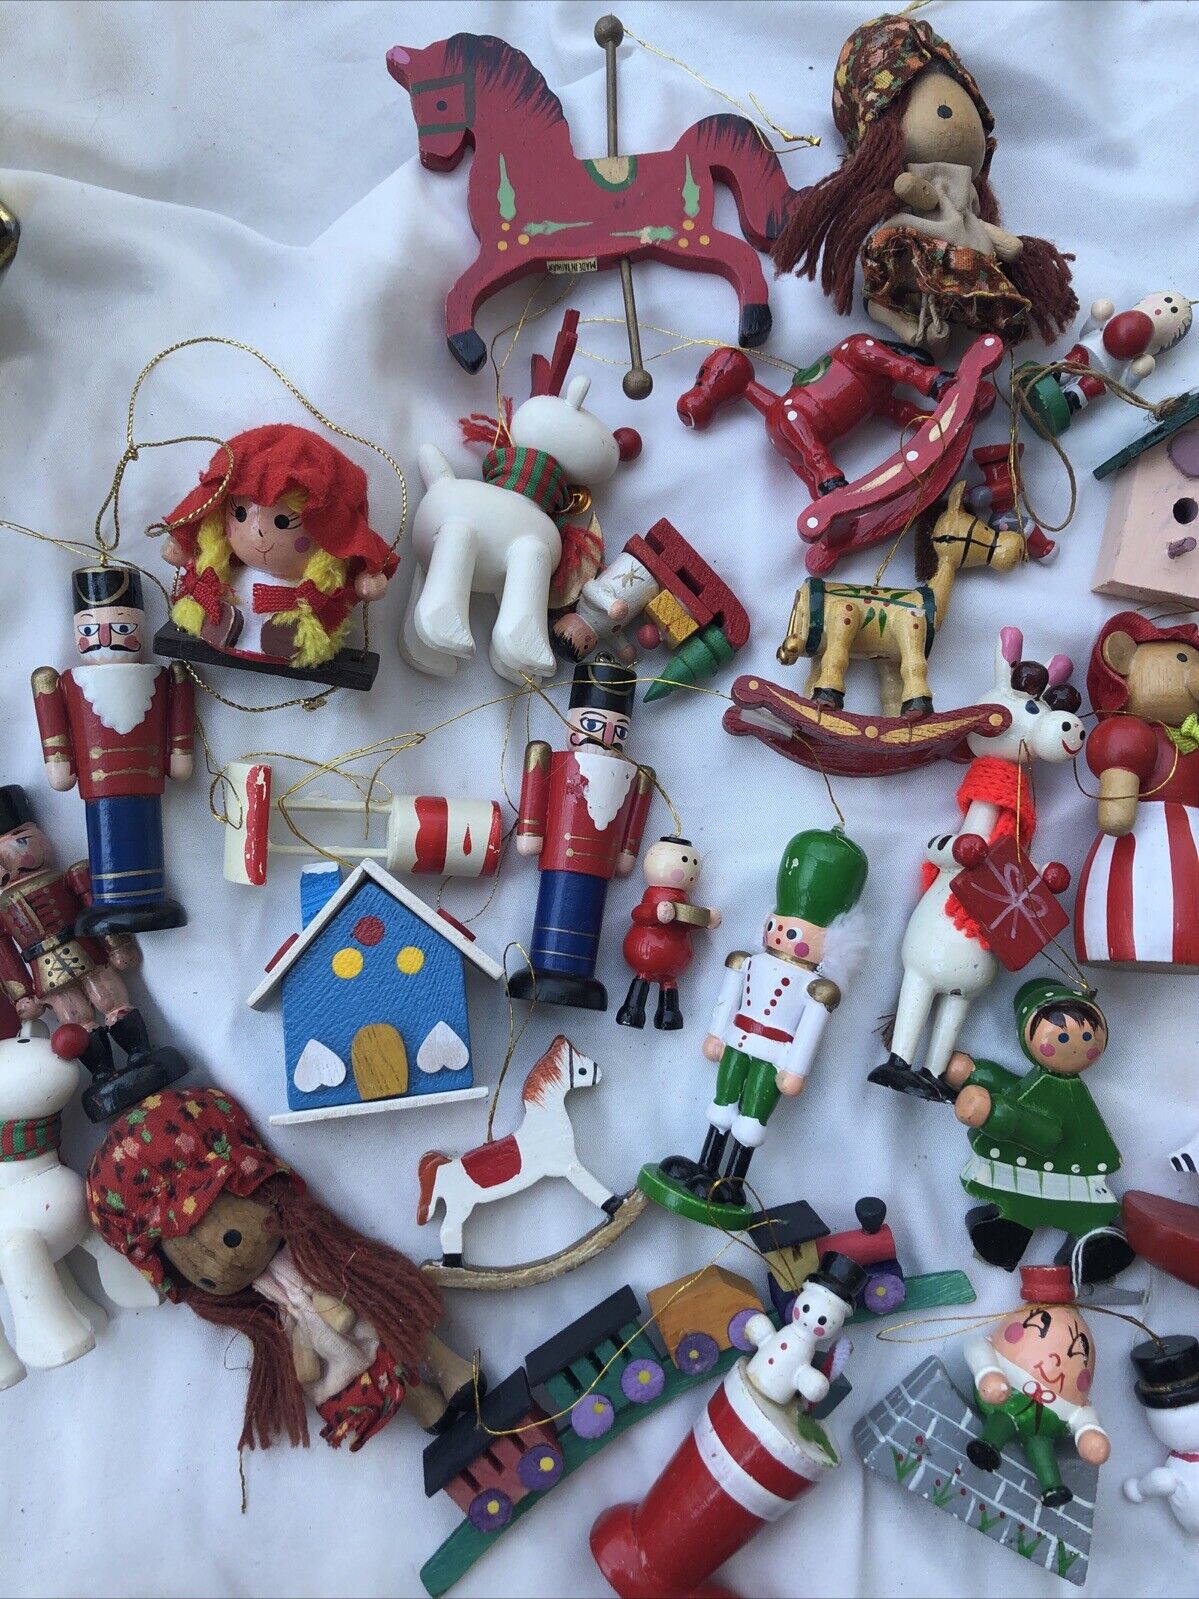 Lot Of Hand Painted Wooden Christmas Ornaments Vintage Toy Soldiers Nutcracker